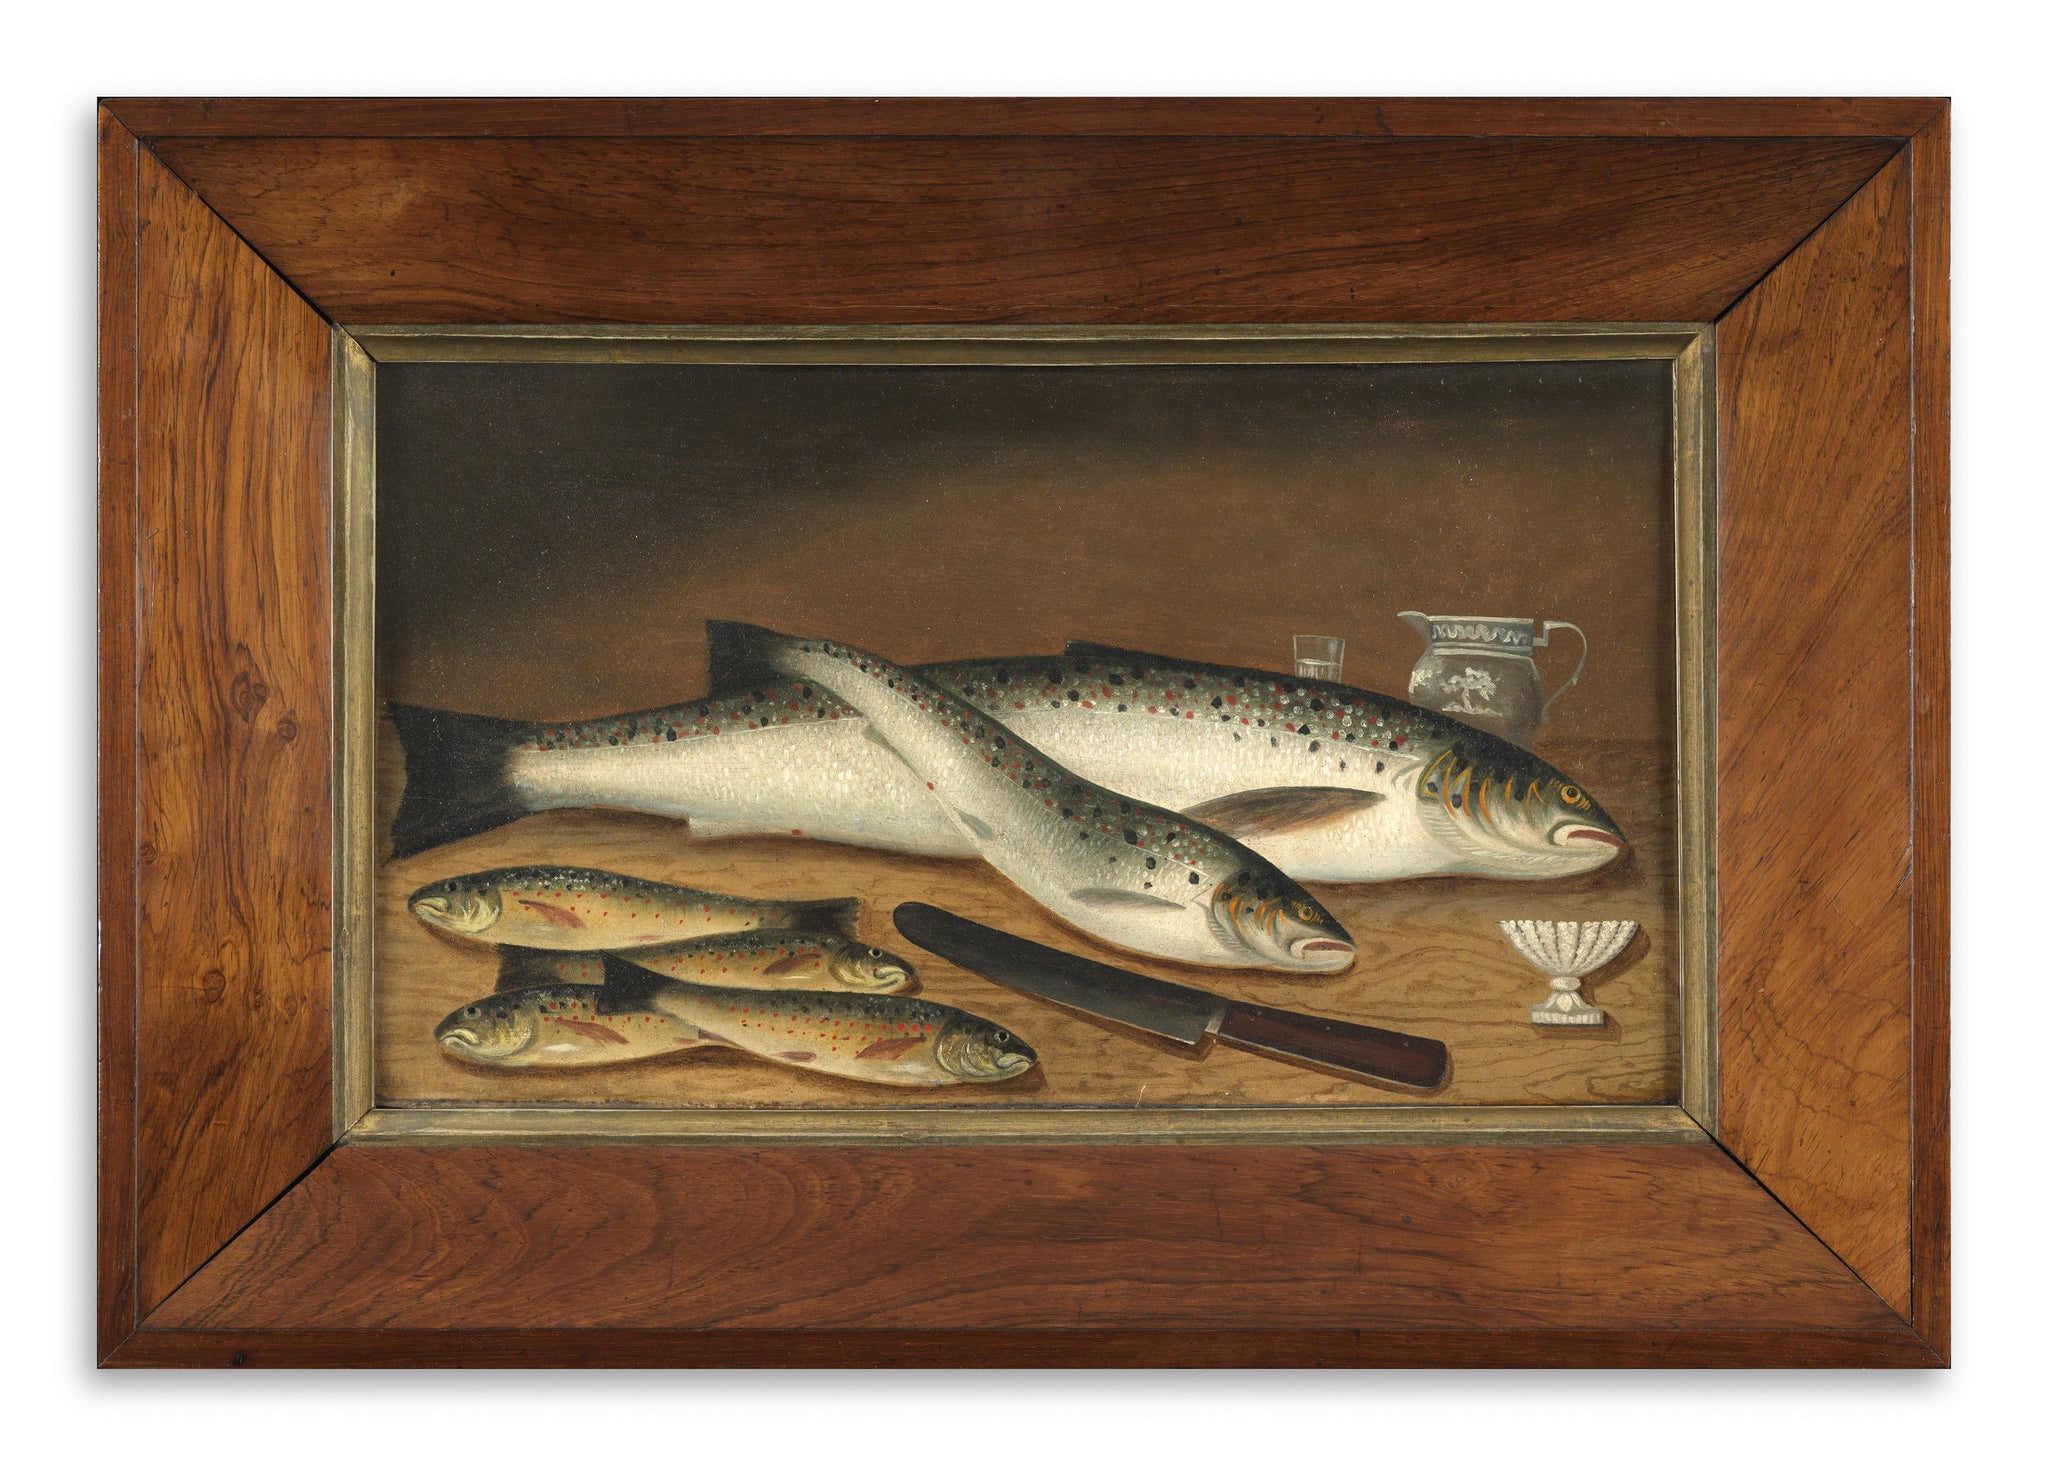 "Salmon And Trout on the Supper Table"